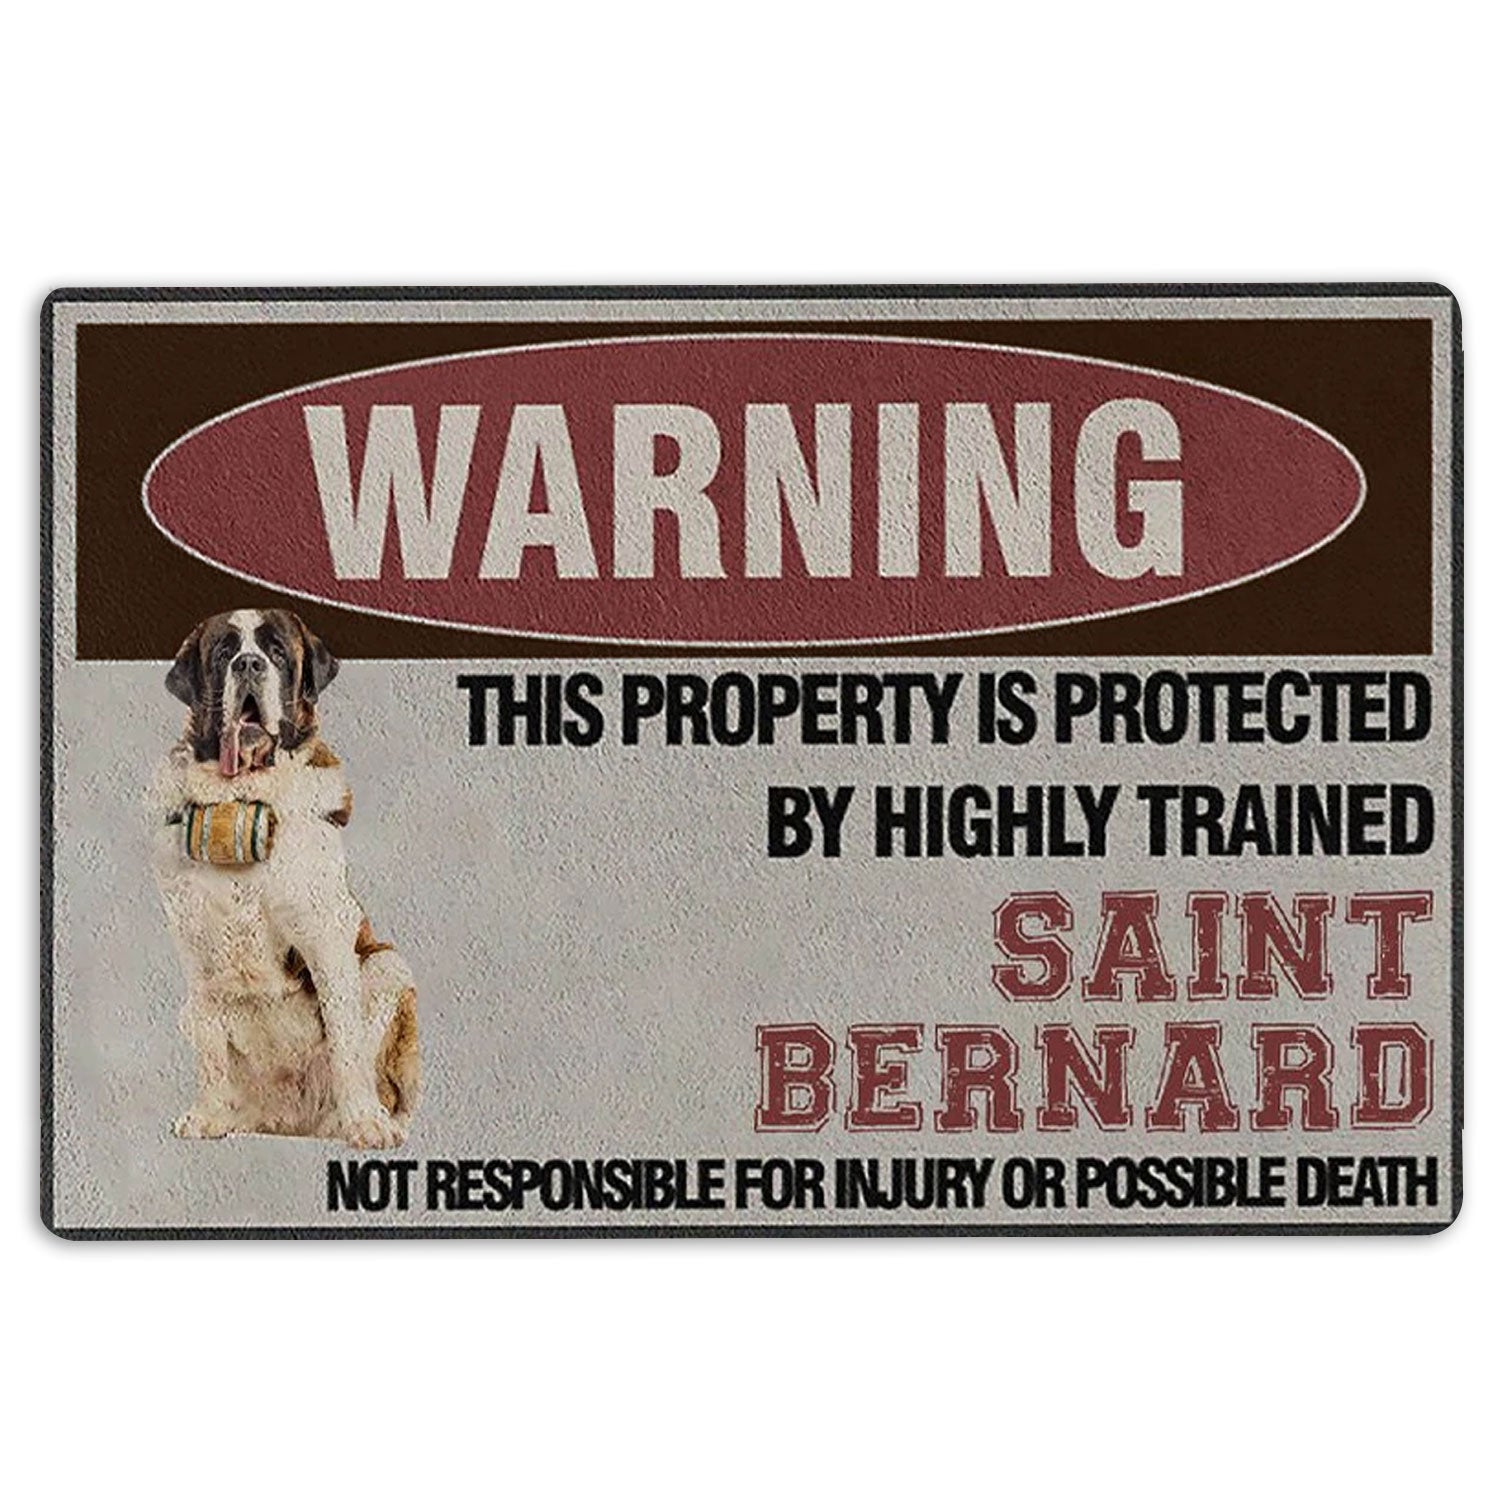 Ohaprints-Doormat-Outdoor-Indoor-This-Property-Is-Protected-By-A-Highly-Trained-Saint-Bernard-Dog-Rubber-Door-Mat-1357-18'' x 30''